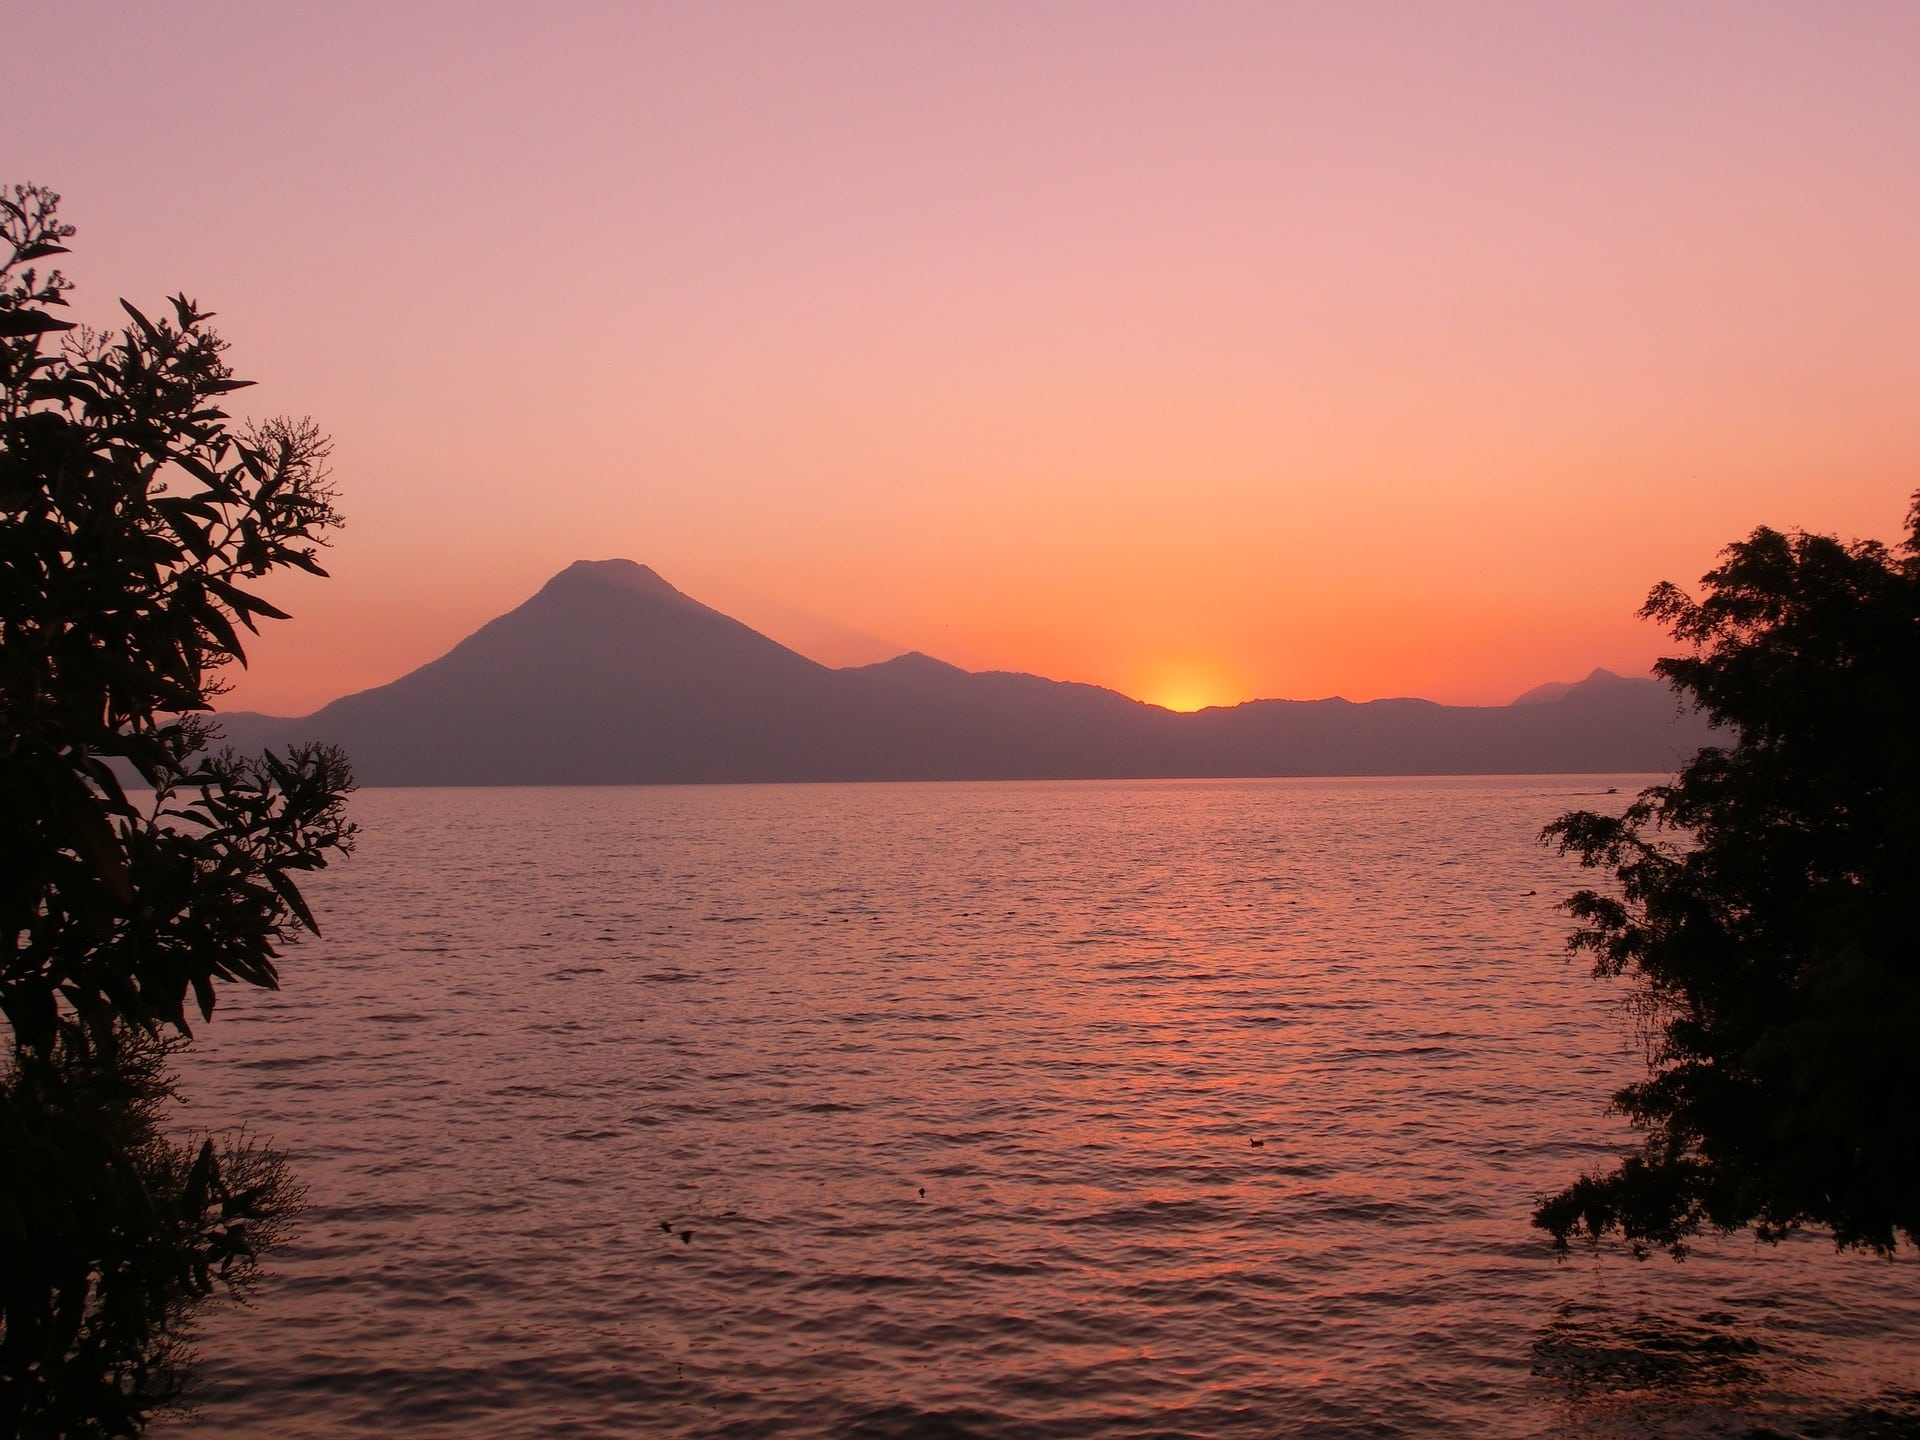 things to do in Guatemala, backpacking Guatemala, places to visit in Guatemala, Guatemala travel guide, Guatemala Travel Itinerary, best time to visit Guatemala, festivals in Guatemala